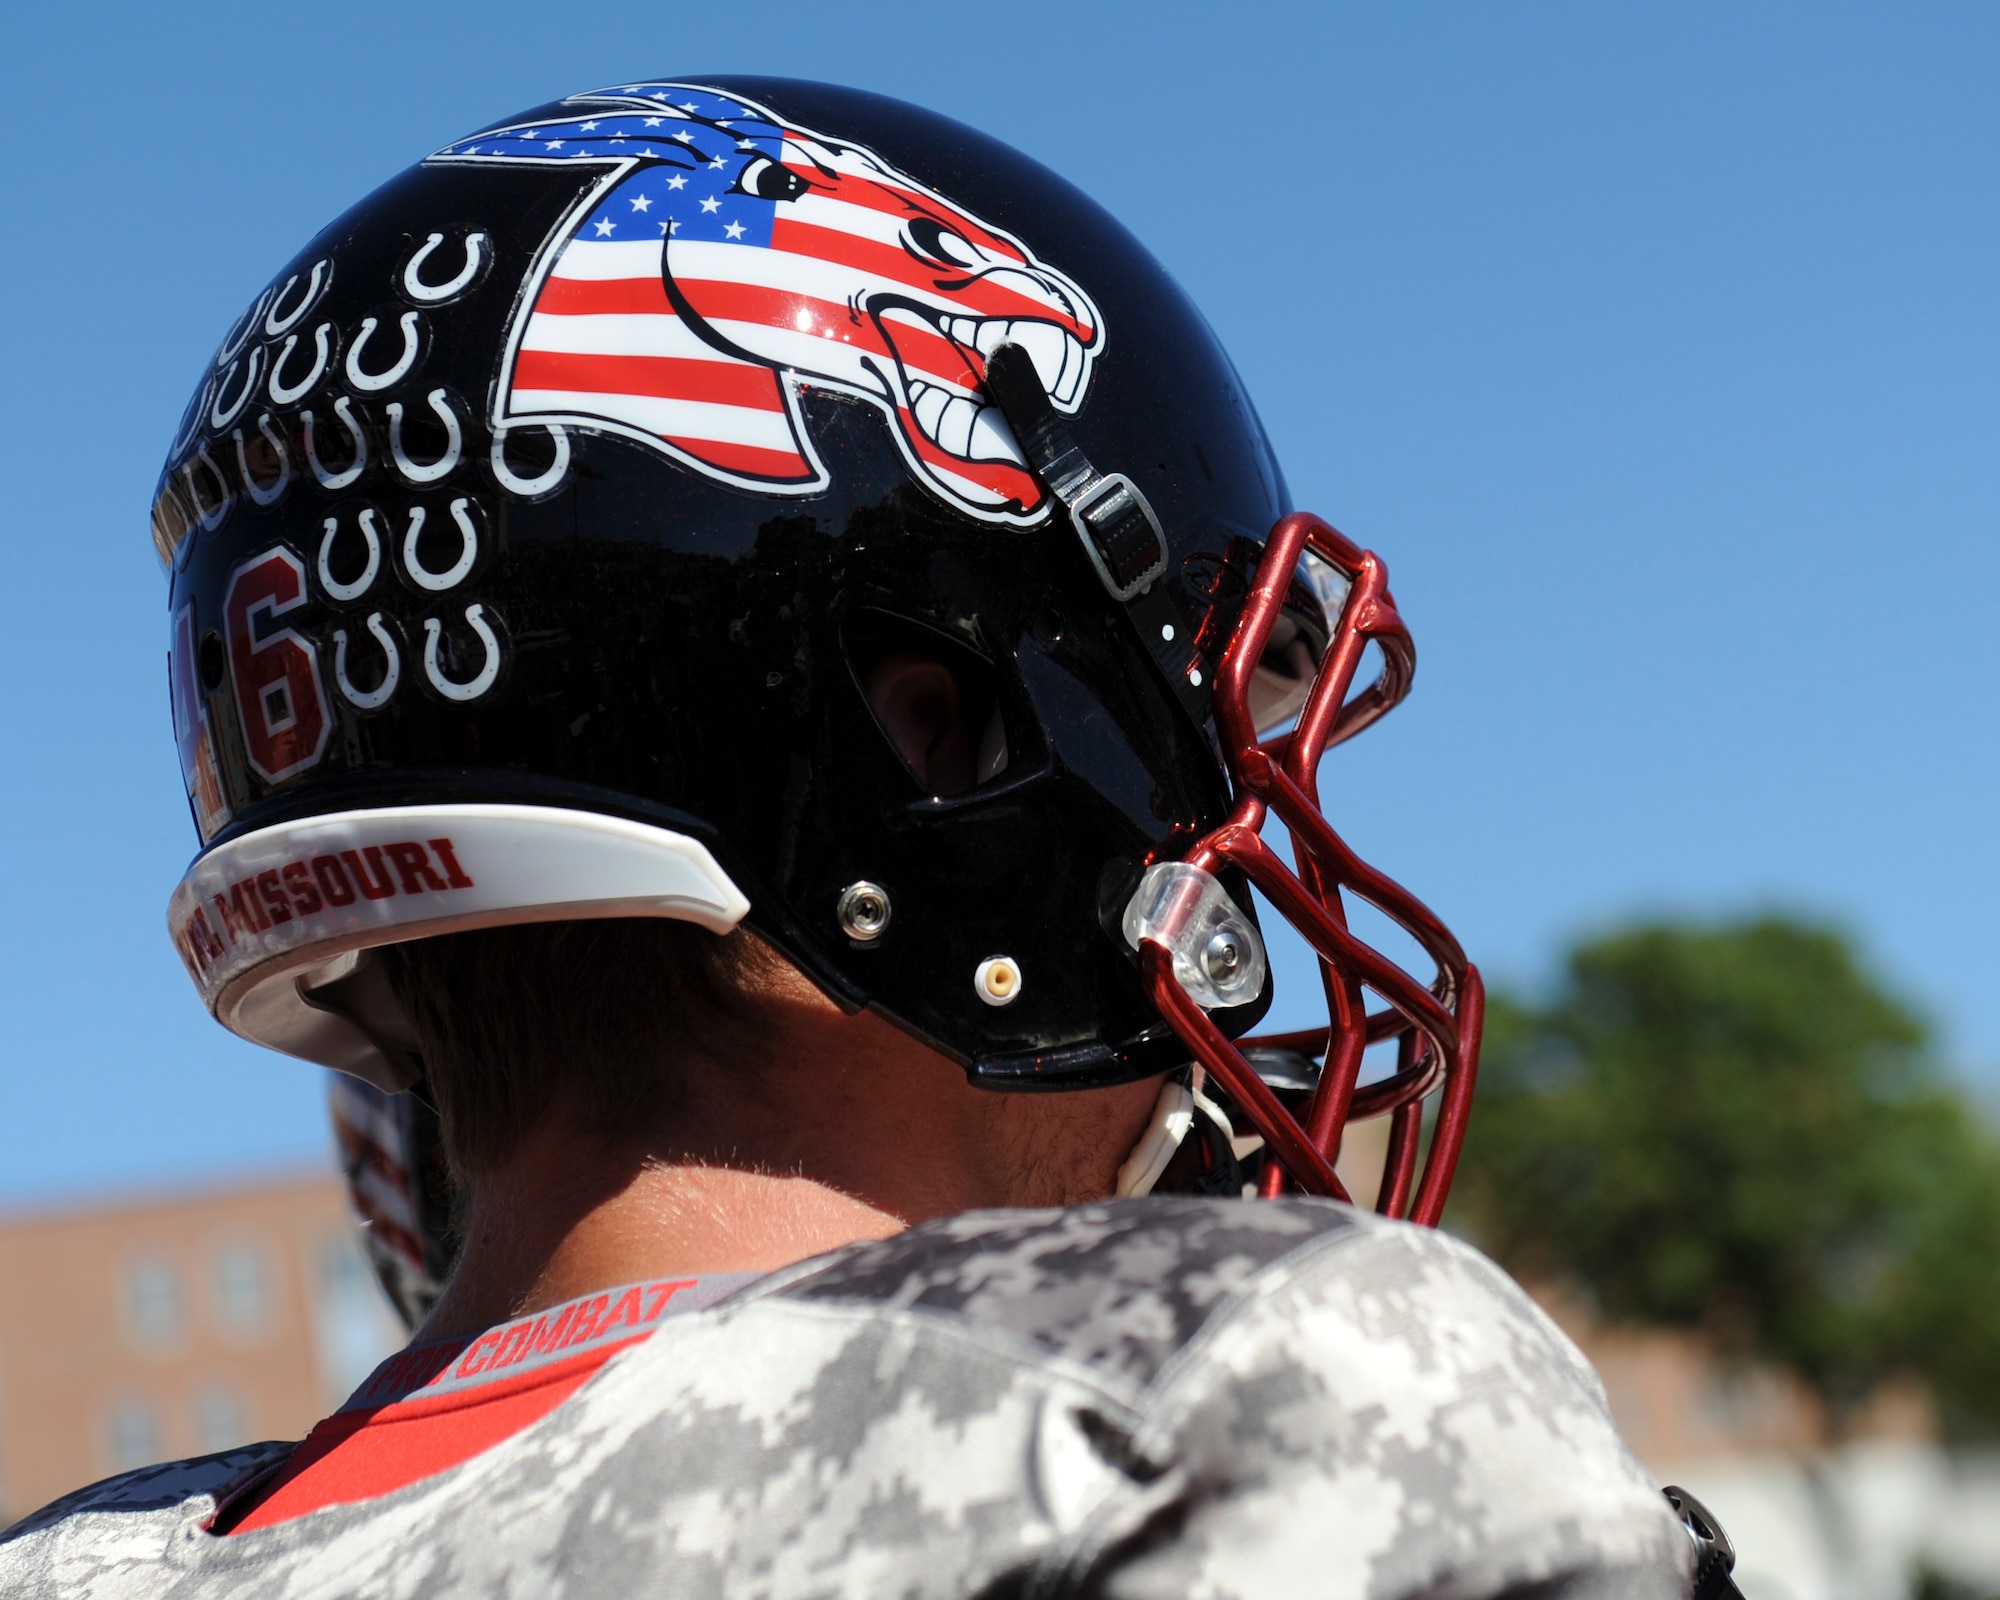 Hundreds of military families attended a free tailgate and game during Military Appreciation Day at the University of Central Missouri (UCM) in Warrensburg, Mo., Oct. 8, 2015. U.S. Air Force Brig. Gen. Paul W. Tibbets IV, thw 509th Bomb Wing commander, performed a coin toss before the start of the game. 